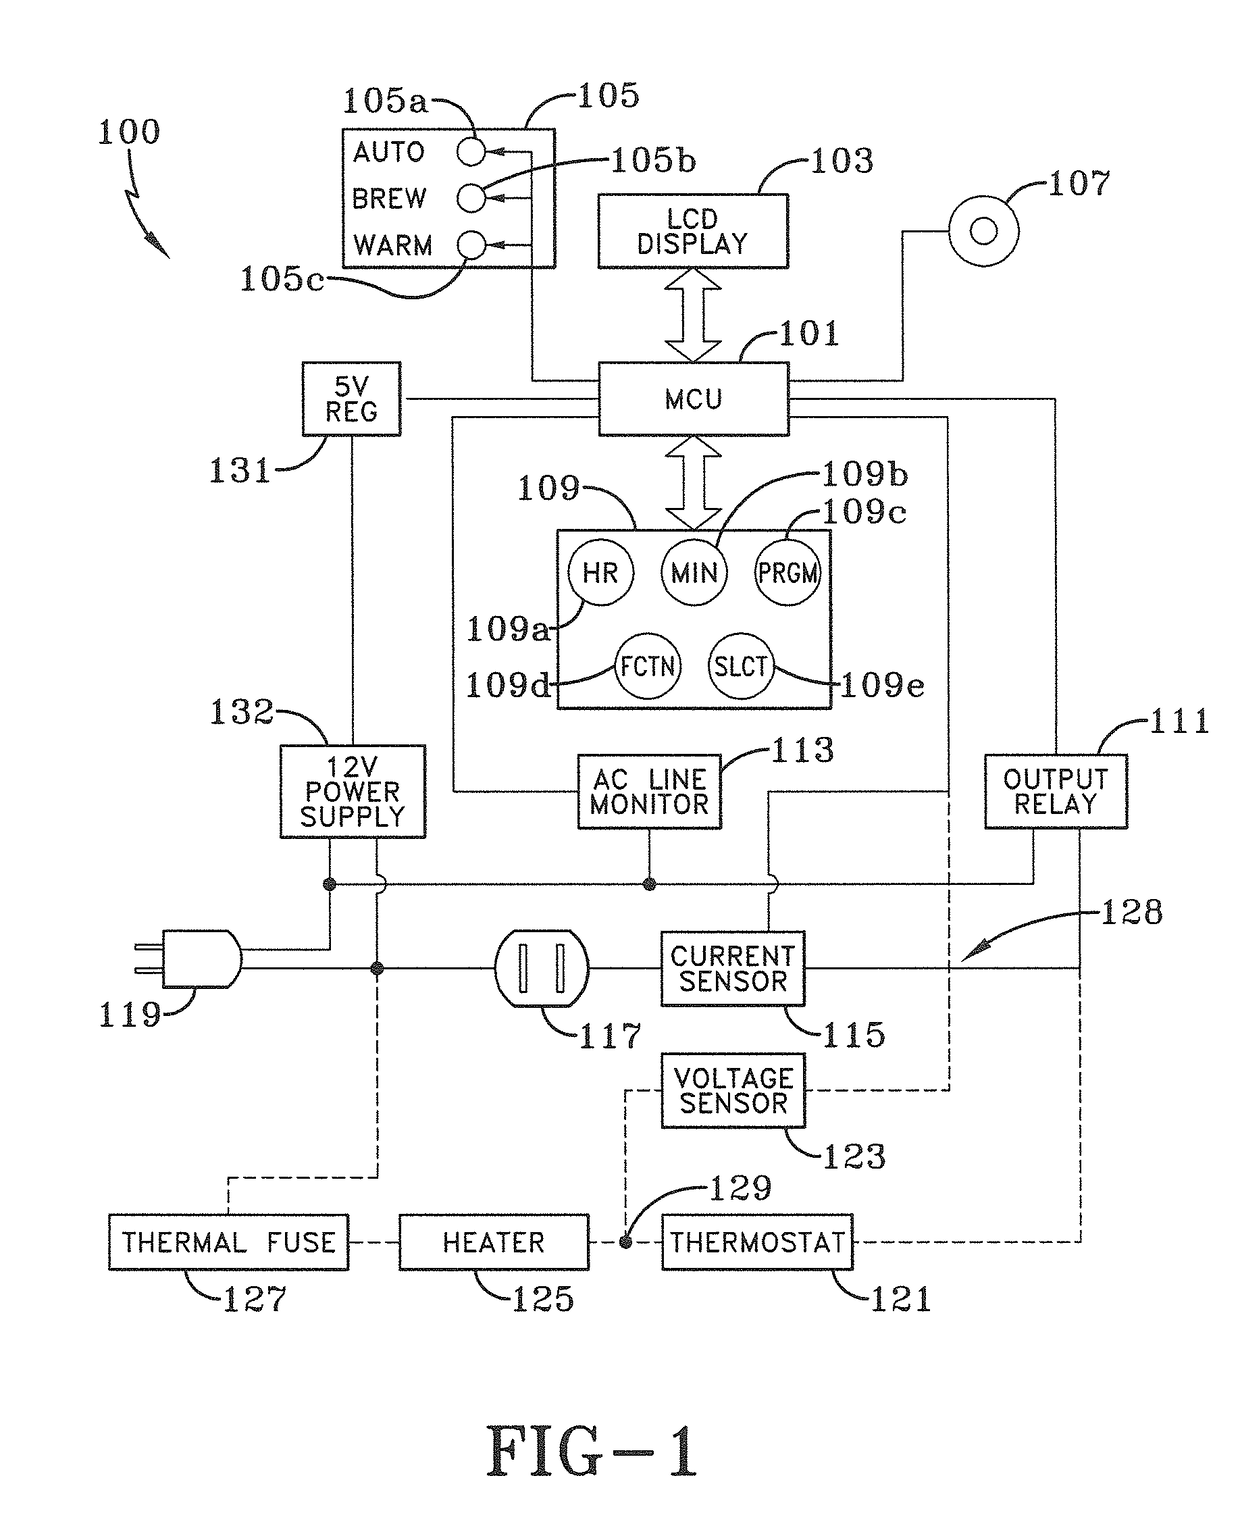 Device for controlling a coffee maker